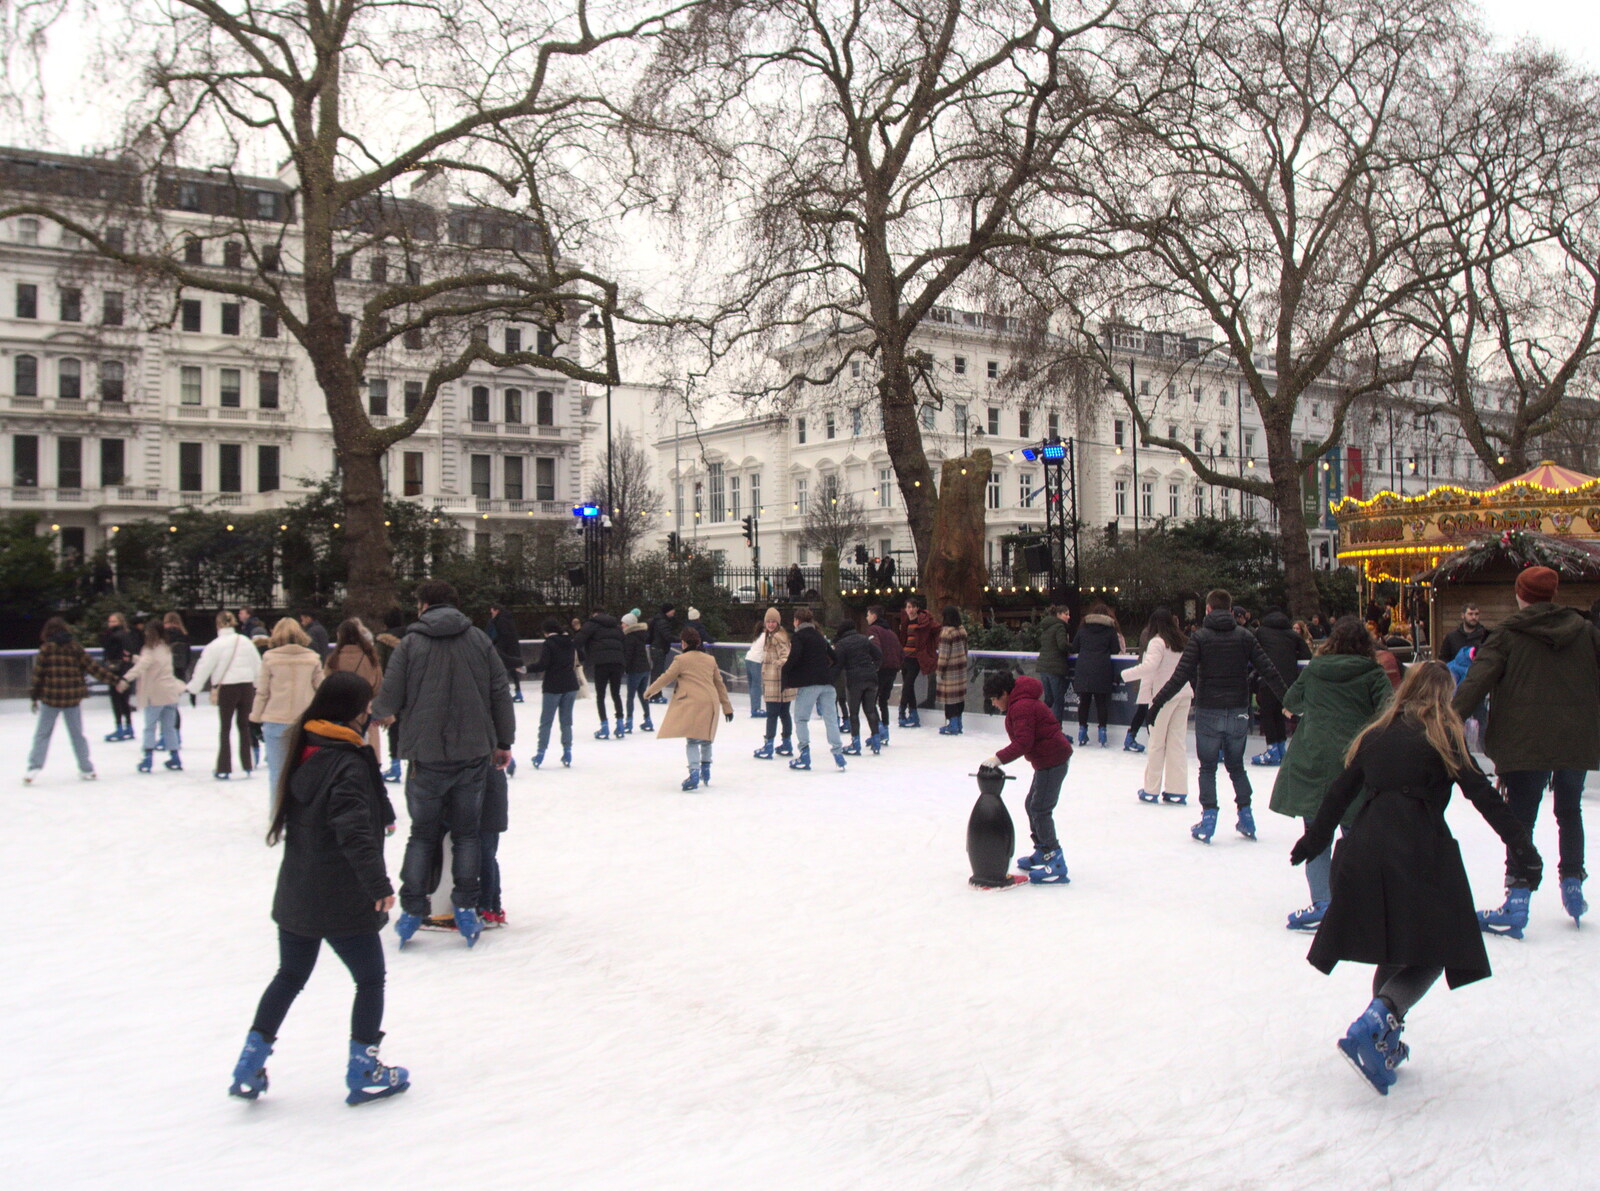 Skaters on the rink outside the museum from A Trip to the Natural History Museum, Kensington, London - 15th January 2022